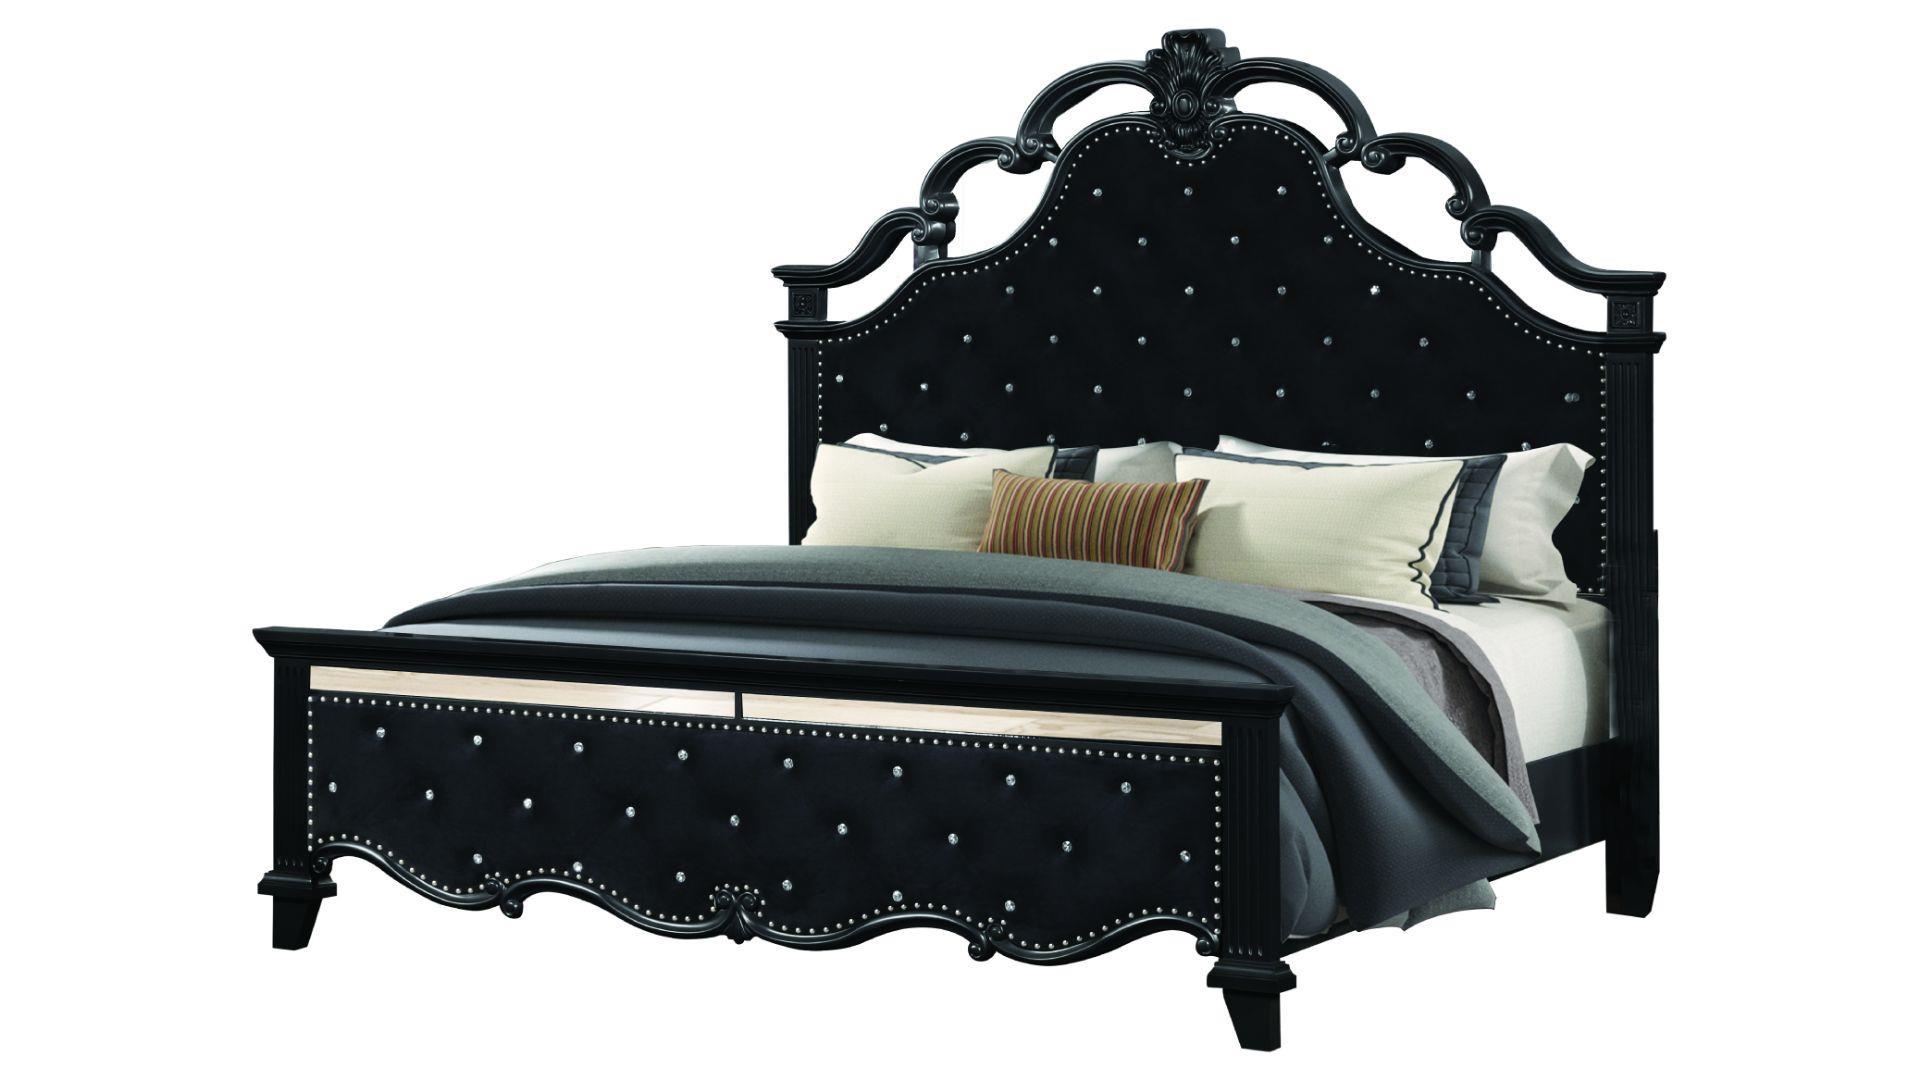 

    
Glam Black Tufted Queen Bedroom Set 5P MILAN Galaxy Home Contemporary Modern
